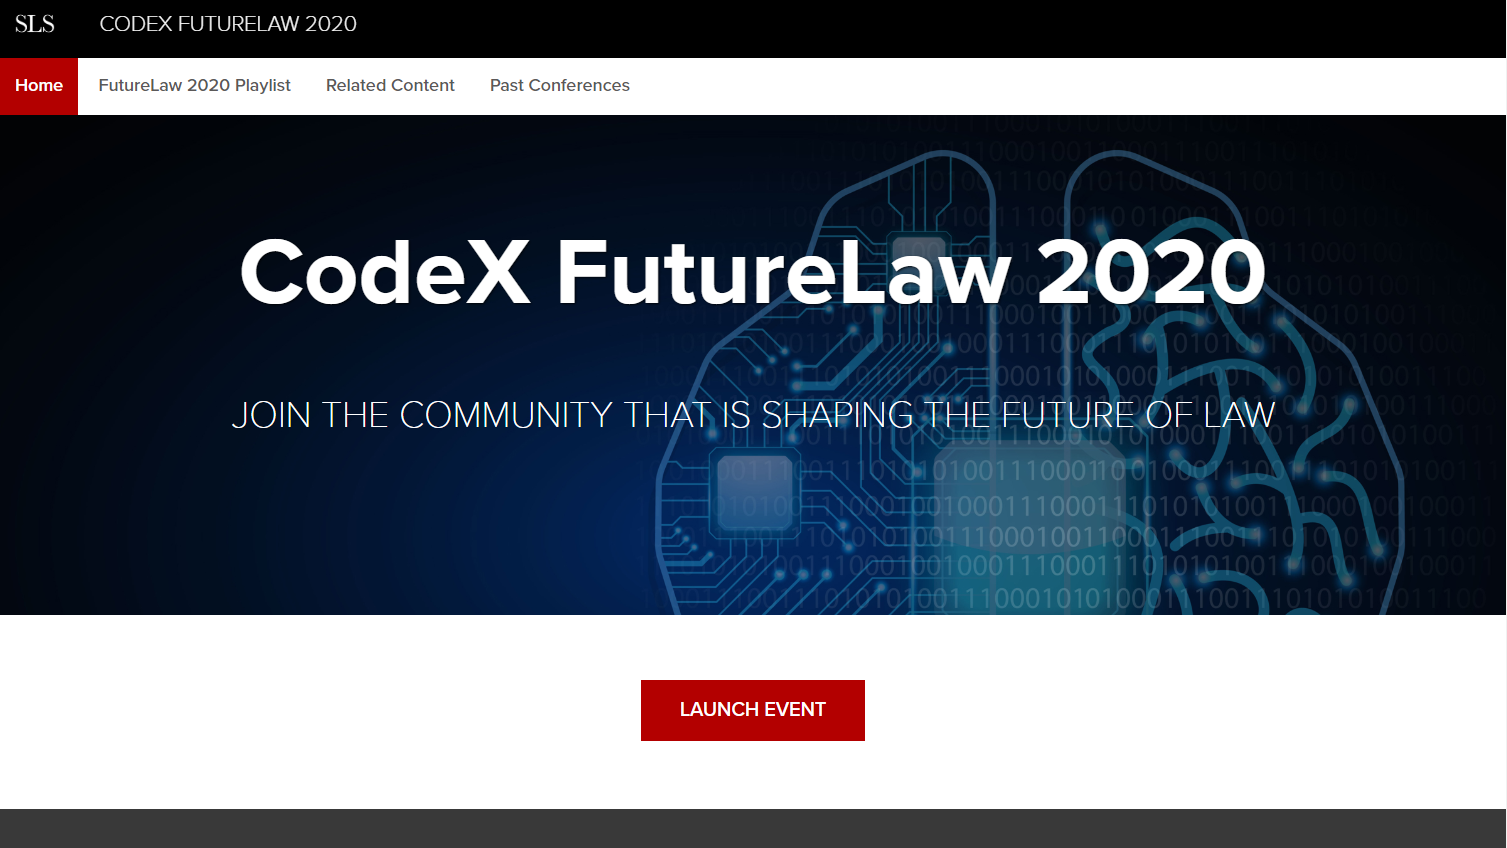 CodeX Goes Virtual with its FutureLaw Conference, Posting it All Online